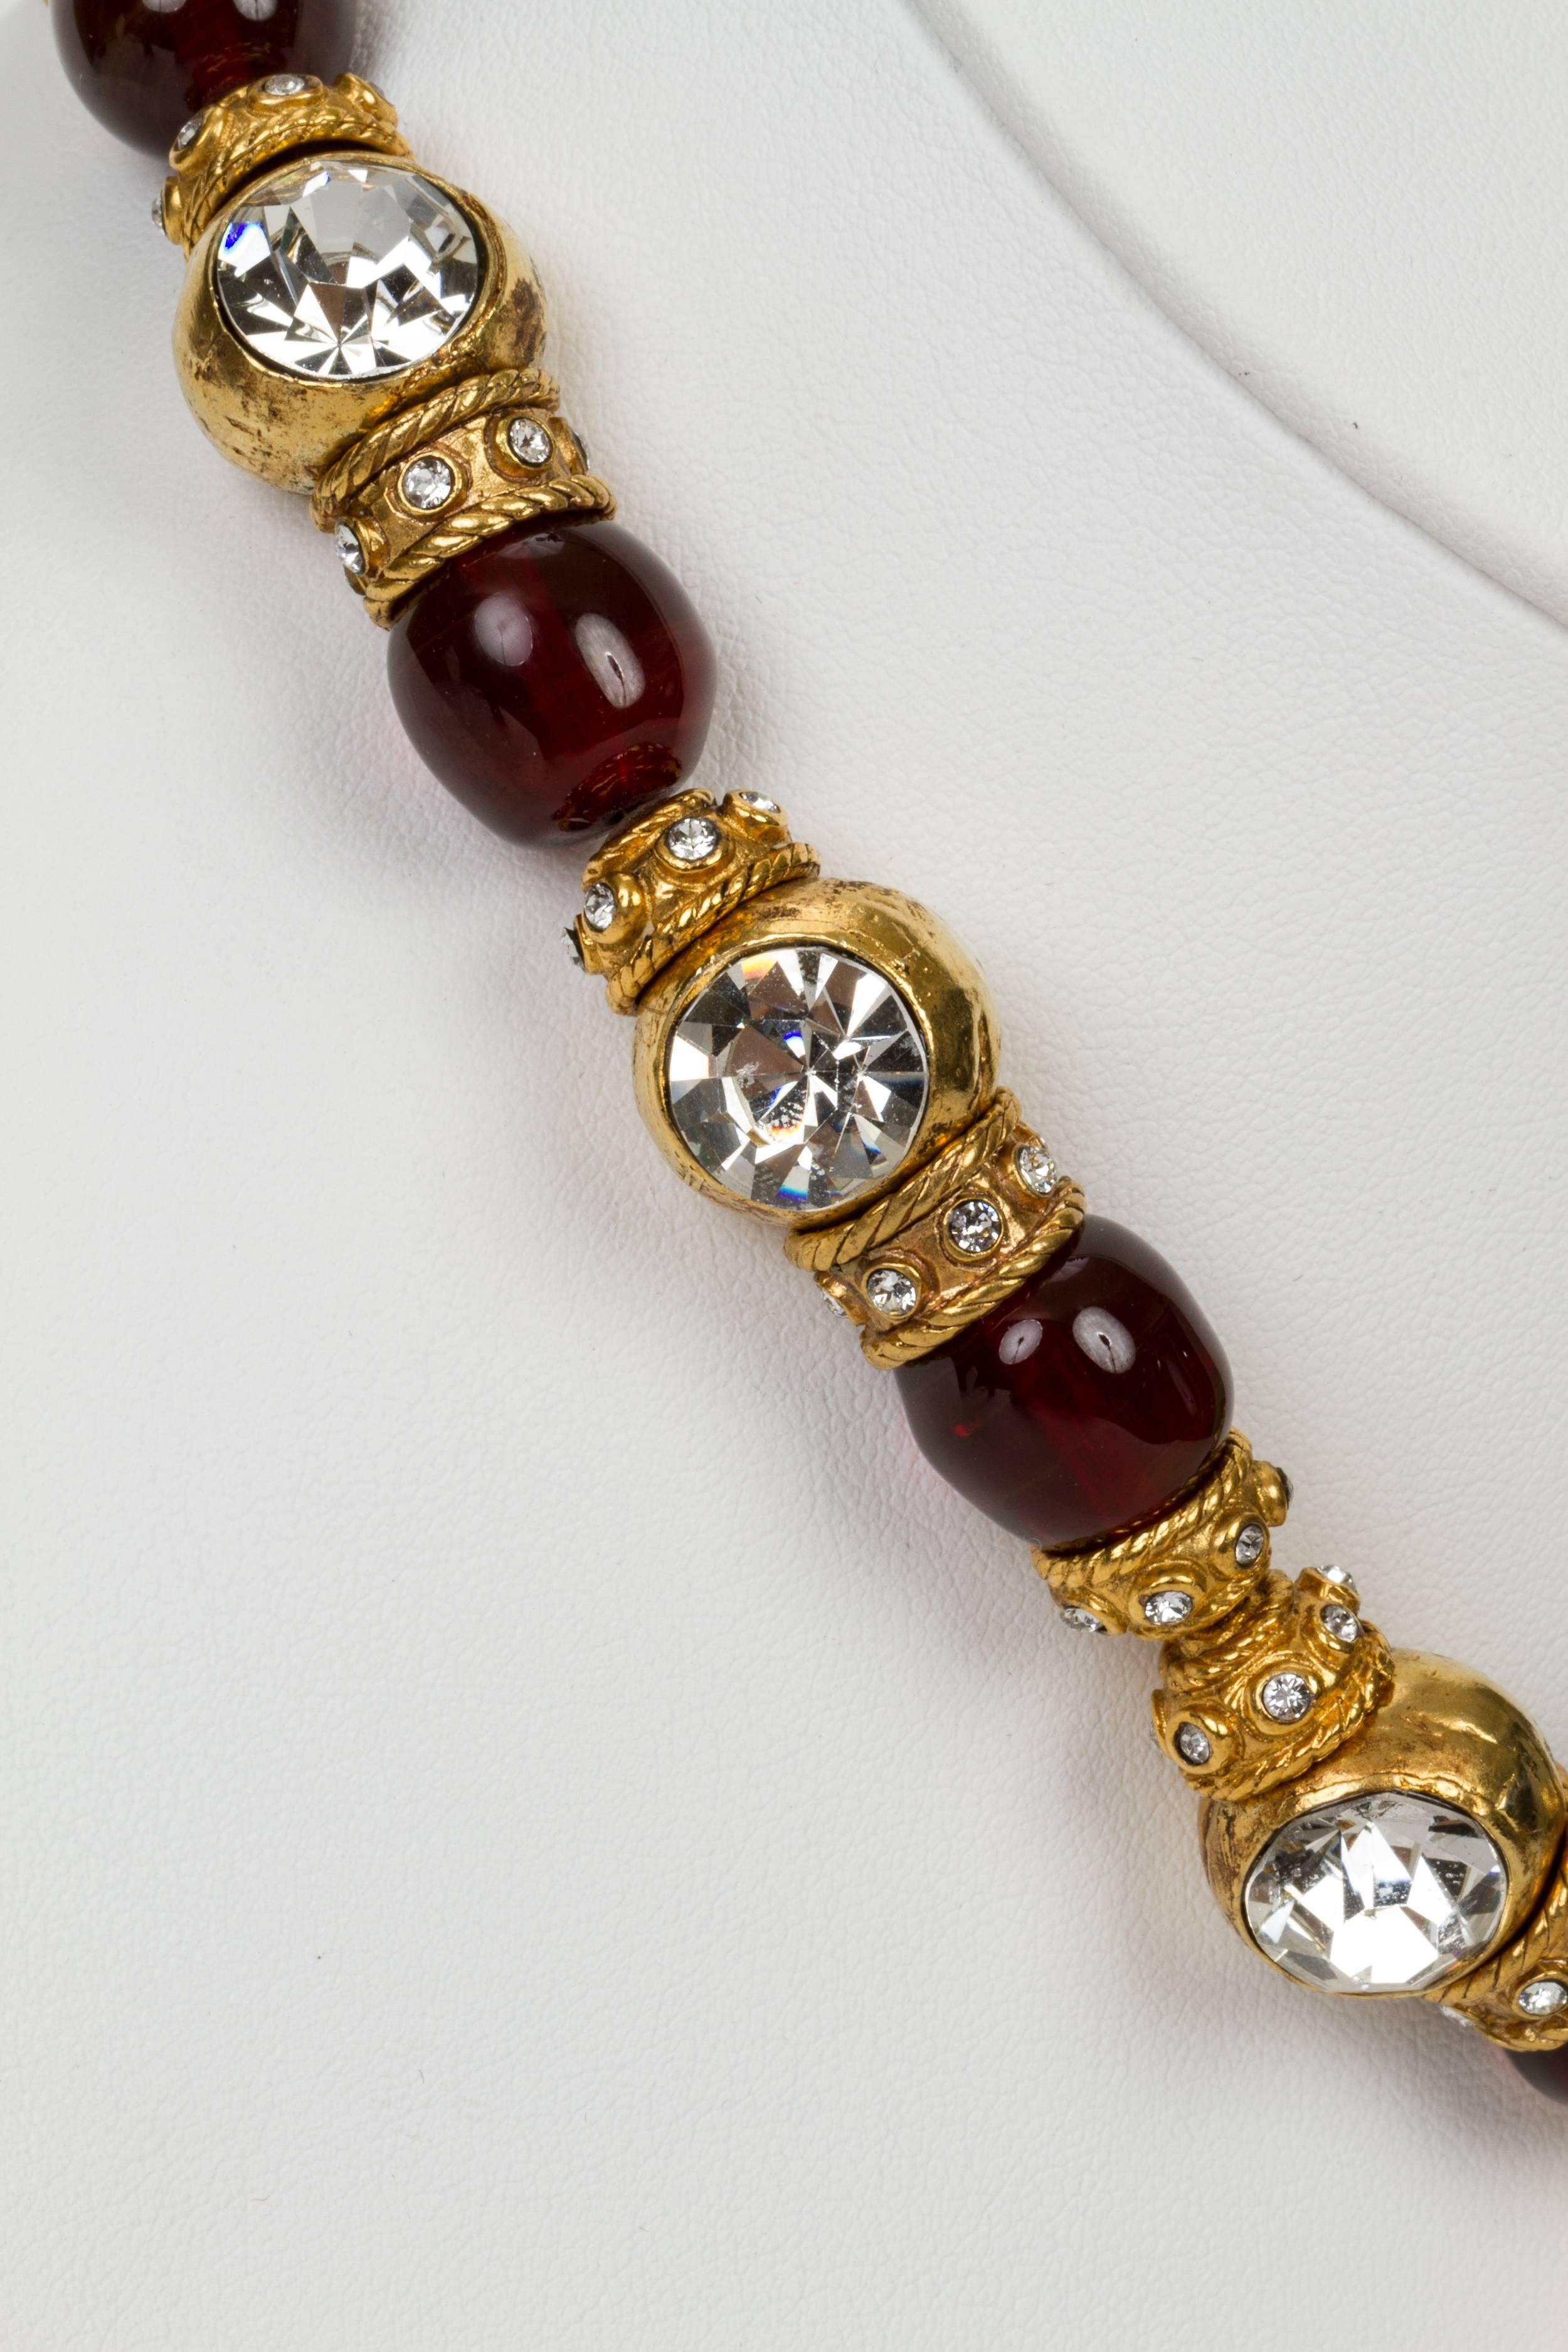 1970s Chanel oversized red gripoix and goldtone metal bead necklace with large crystal and red glass dangling charm. From a private collection and is in pristine condition. Comes with the original vintage Chanel box.